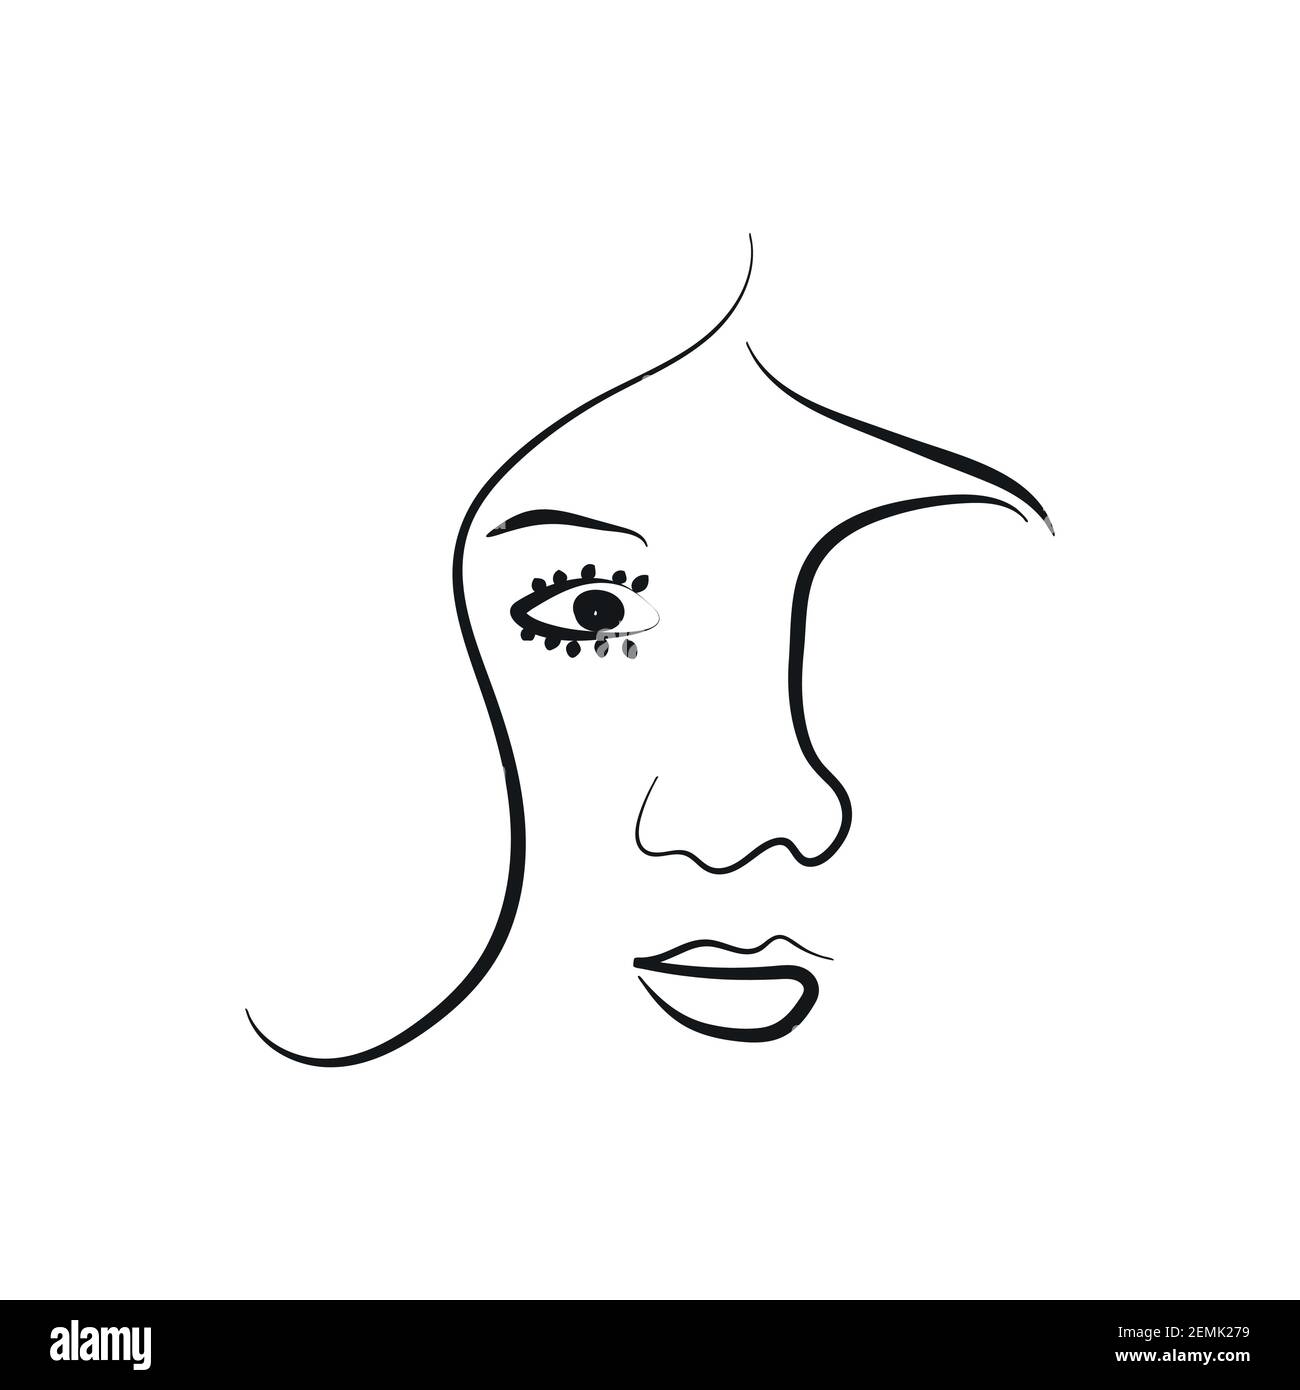 Modern Abstract Face Portrait. Linear Ink Brush. Line Art. Fashion Style Black And White Abstraction Poster. Stock Vector